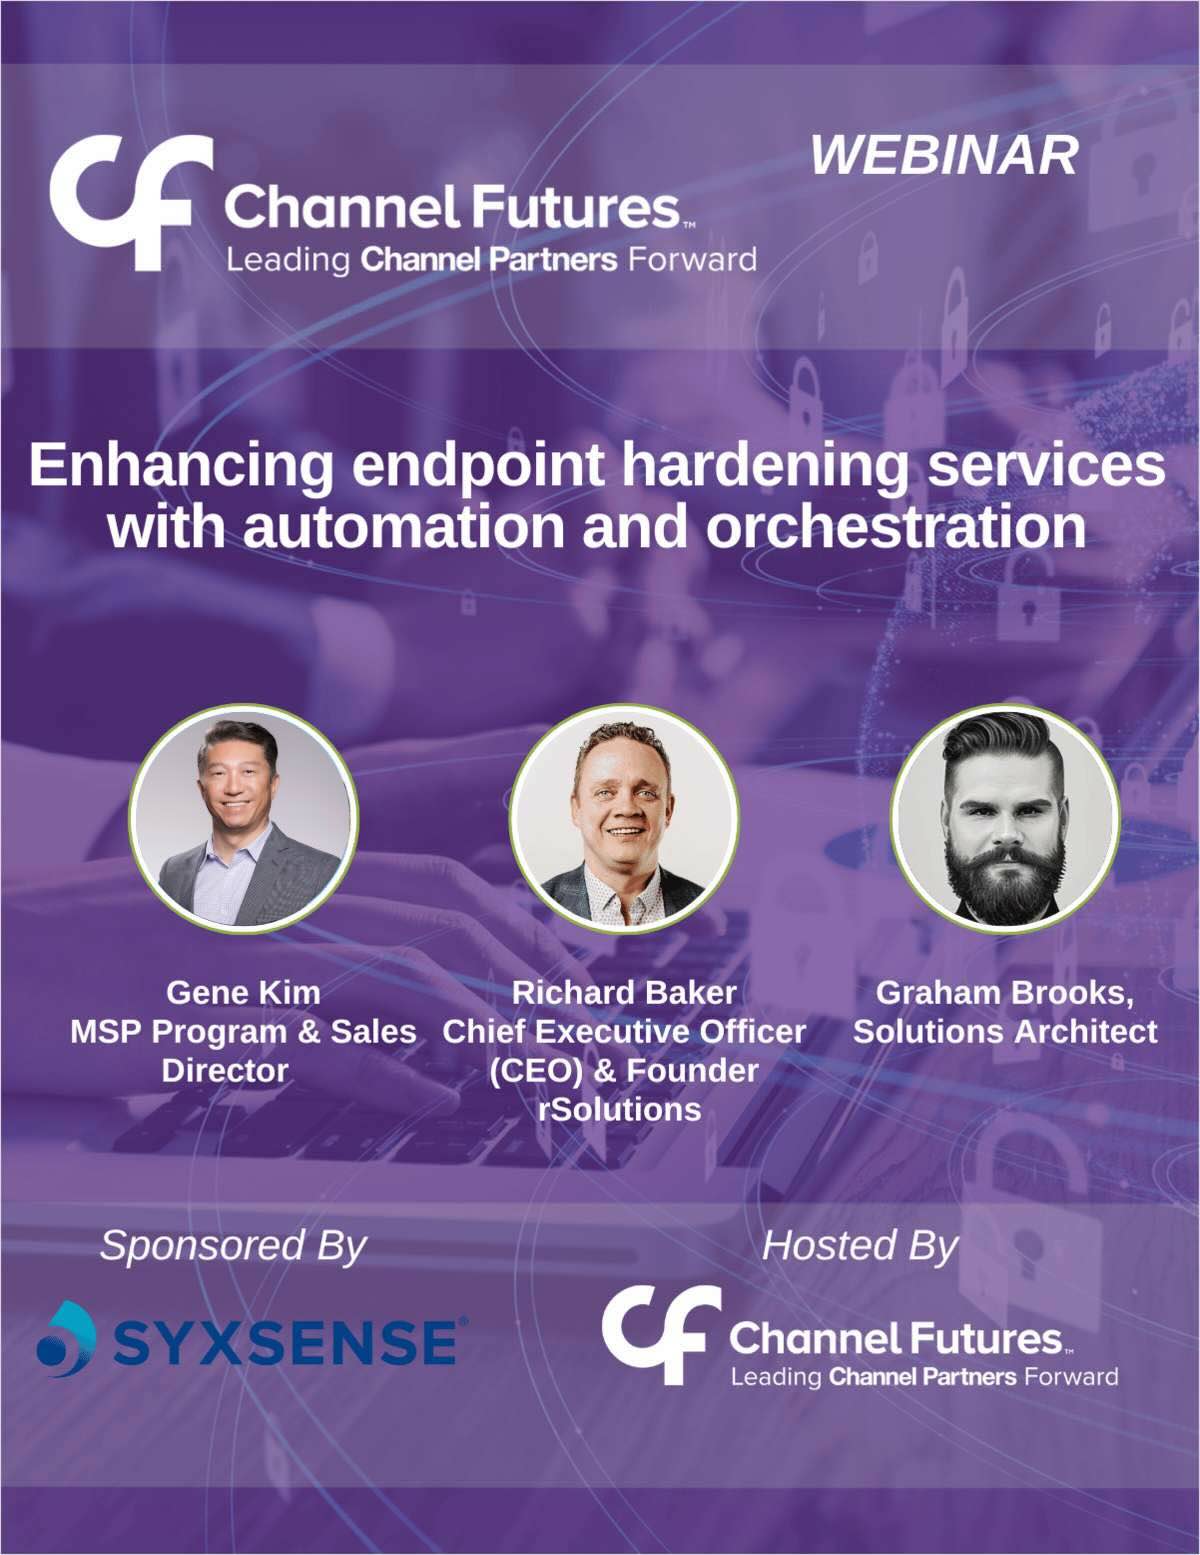 Enhancing Endpoint Hardening Services with Automation and Orchestration